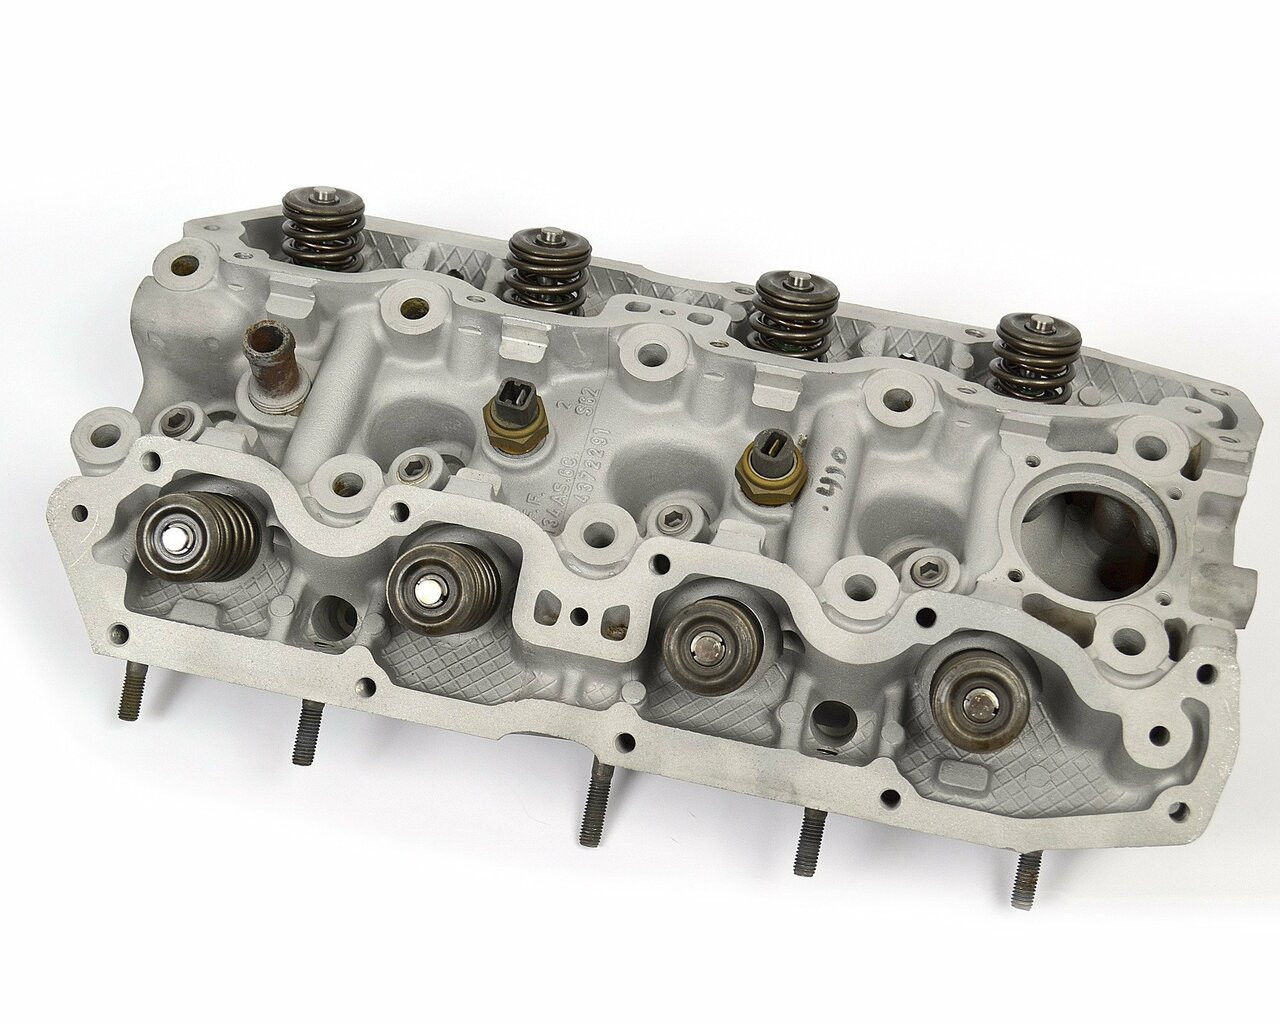 High performance 1756cc cylinder head
FIAT 124 Spider and Sport Coupe 1974-1978 (1756cc) - Auto Ricambi